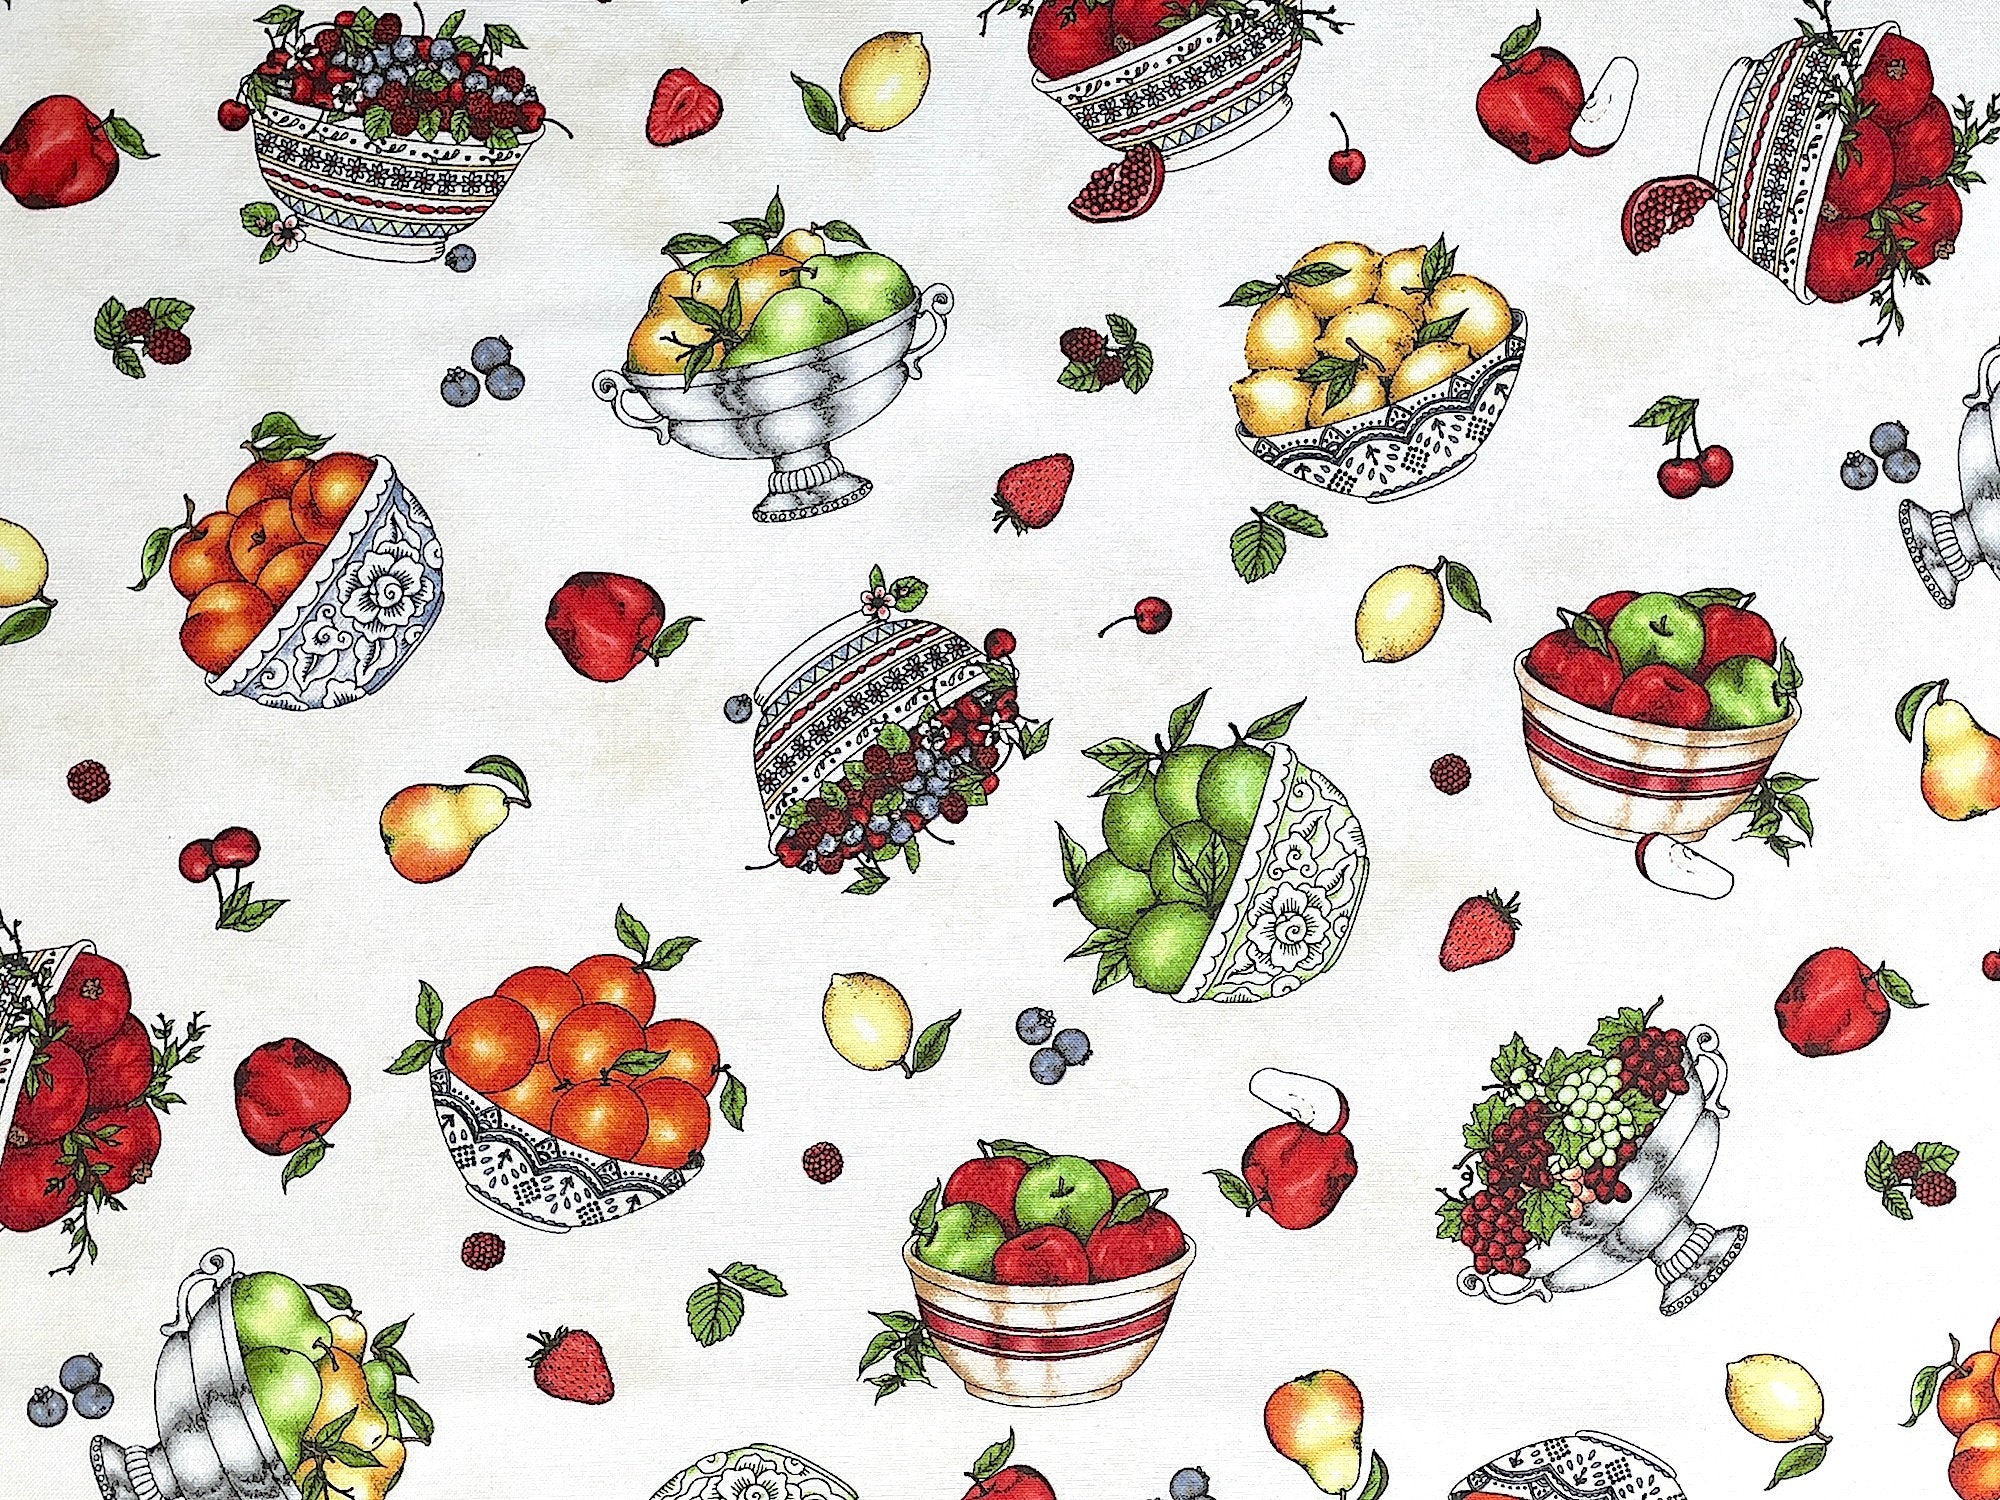 This fabric is part of the Fancy Fruit collection by Kris Lammers. This white cotton fabric is covered with bowls of pears, apples, peaches and cherries.